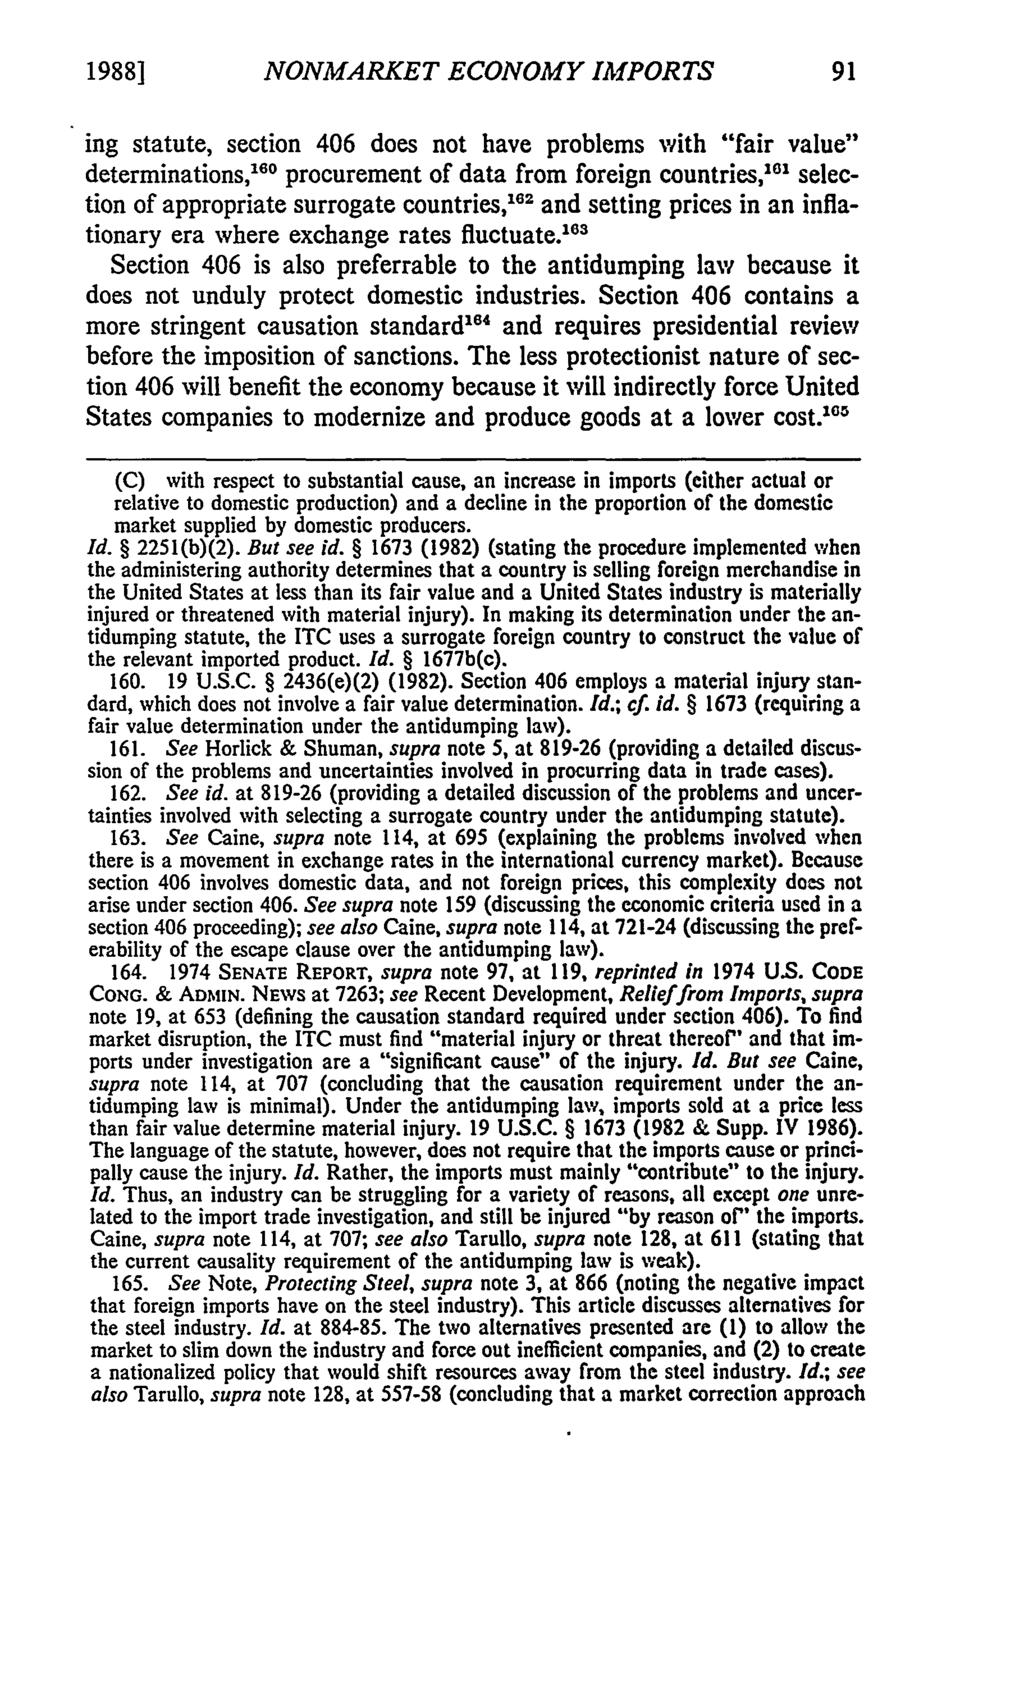 19881 NONMARKET ECONOMY IMPORTS ing statute, section 406 does not have problems with "fair value" determinations, 60 procurement of data from foreign countries," 6 " selection of appropriate